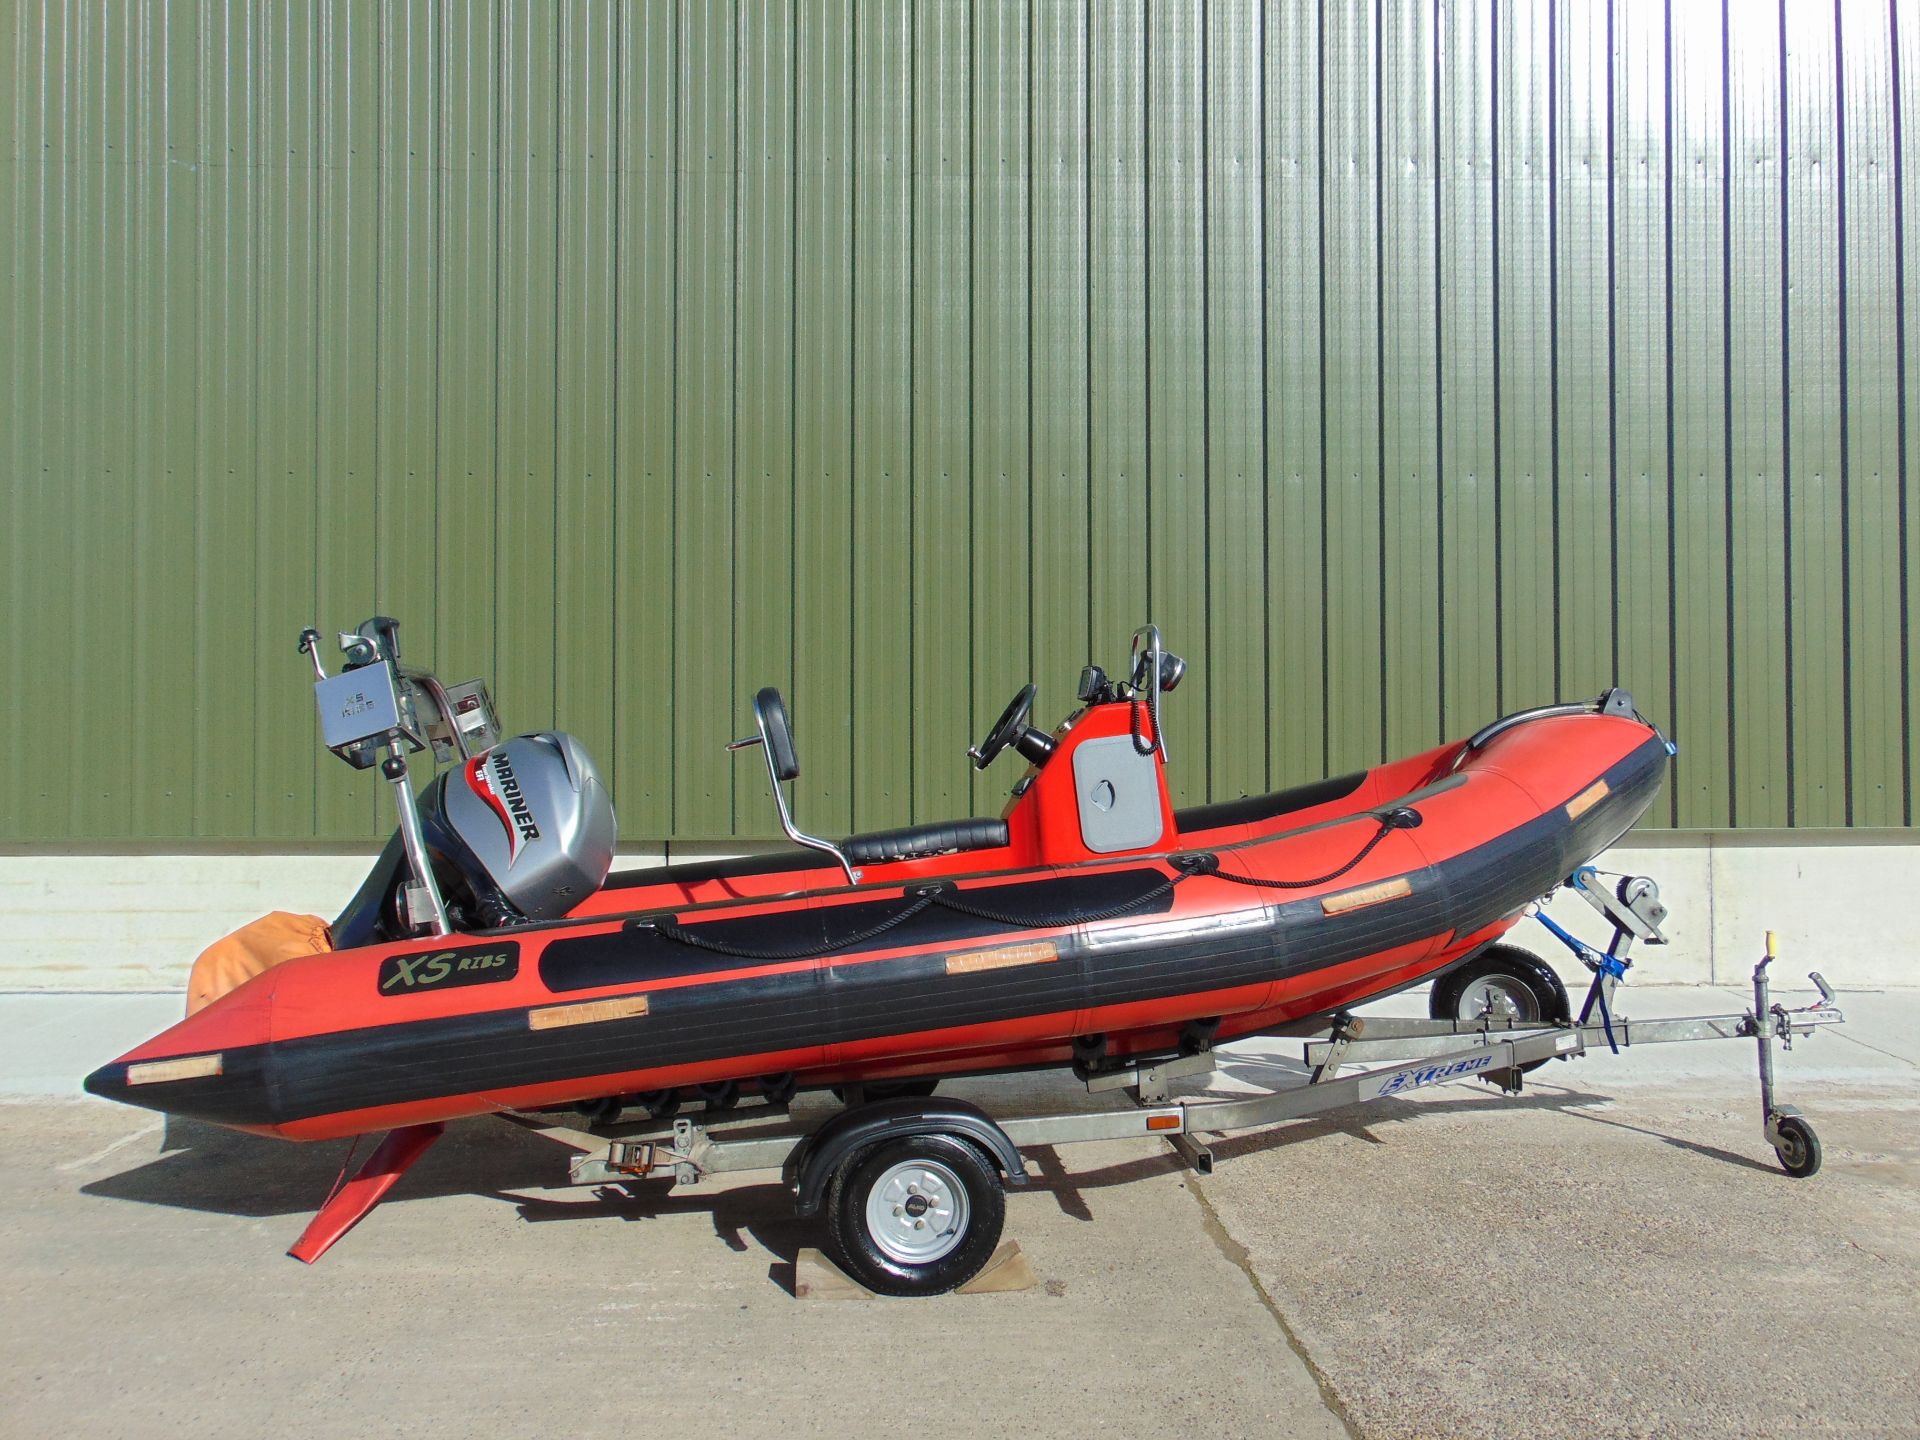 XS-Ribs 4.6M Inflatable w/ Mercury Mariner Four Stroke EFI 60HP Outboard Motor on Trailer.